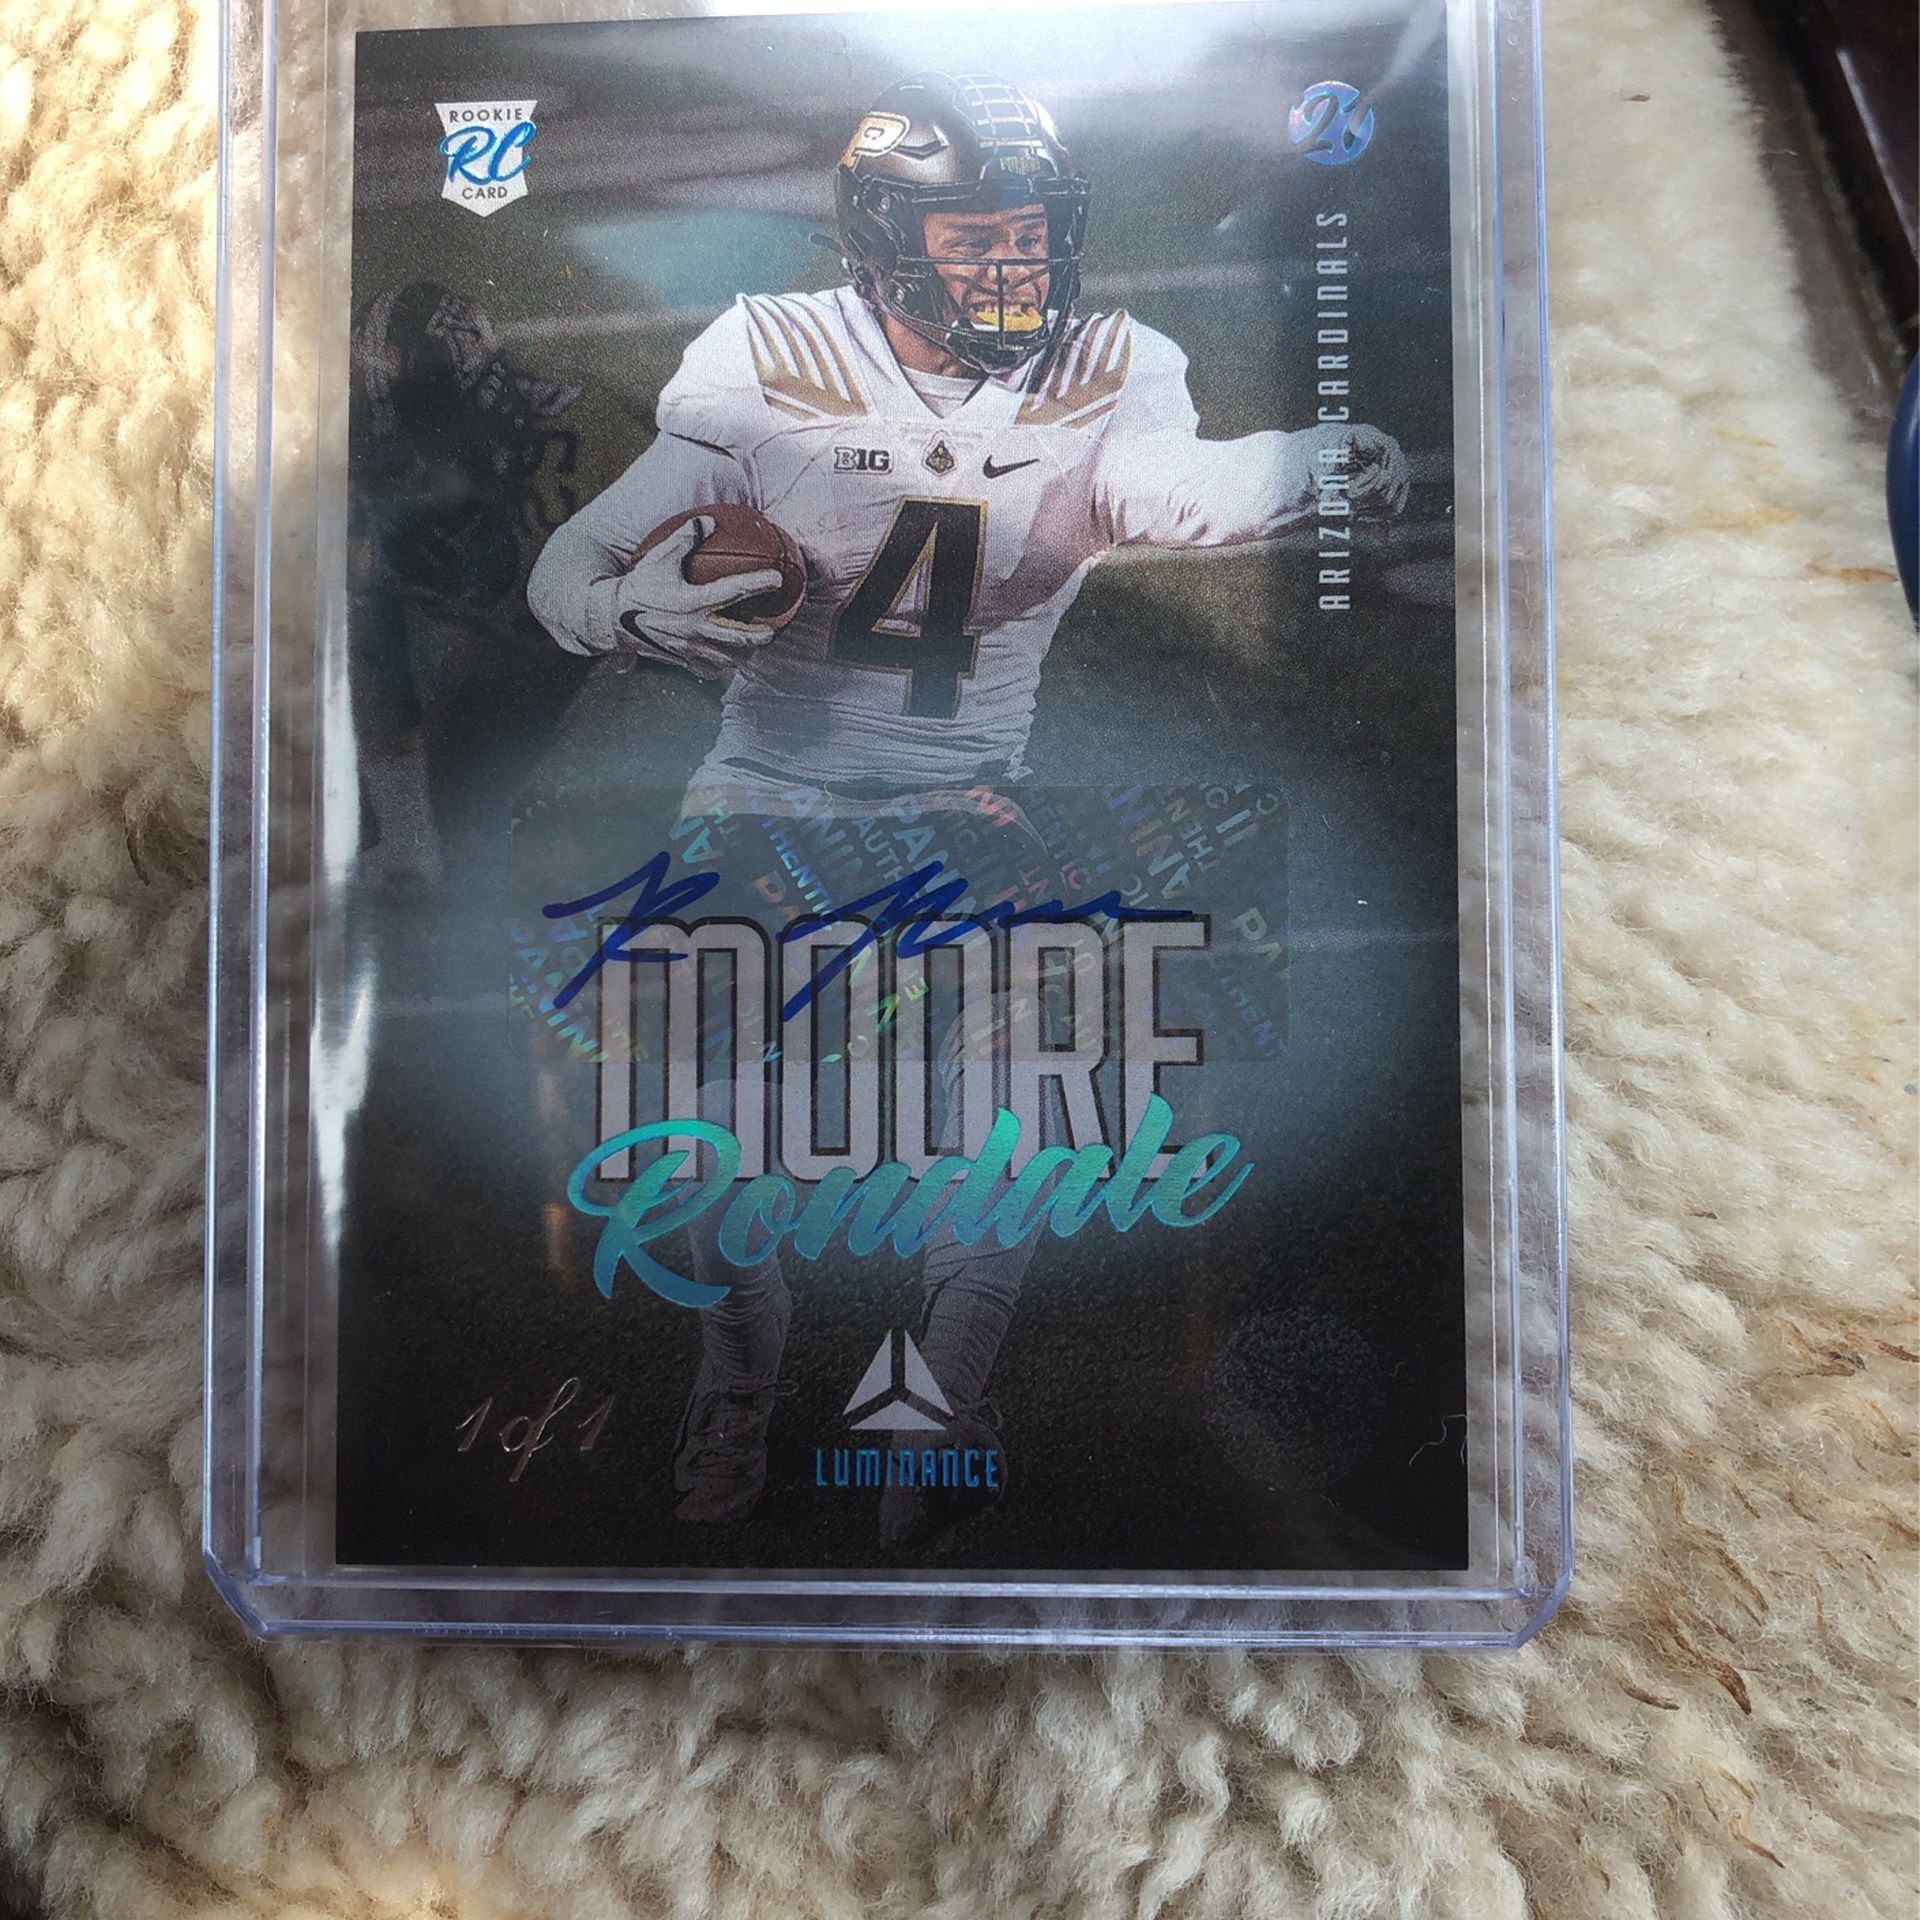 Rondale Moore 1/1 Auto